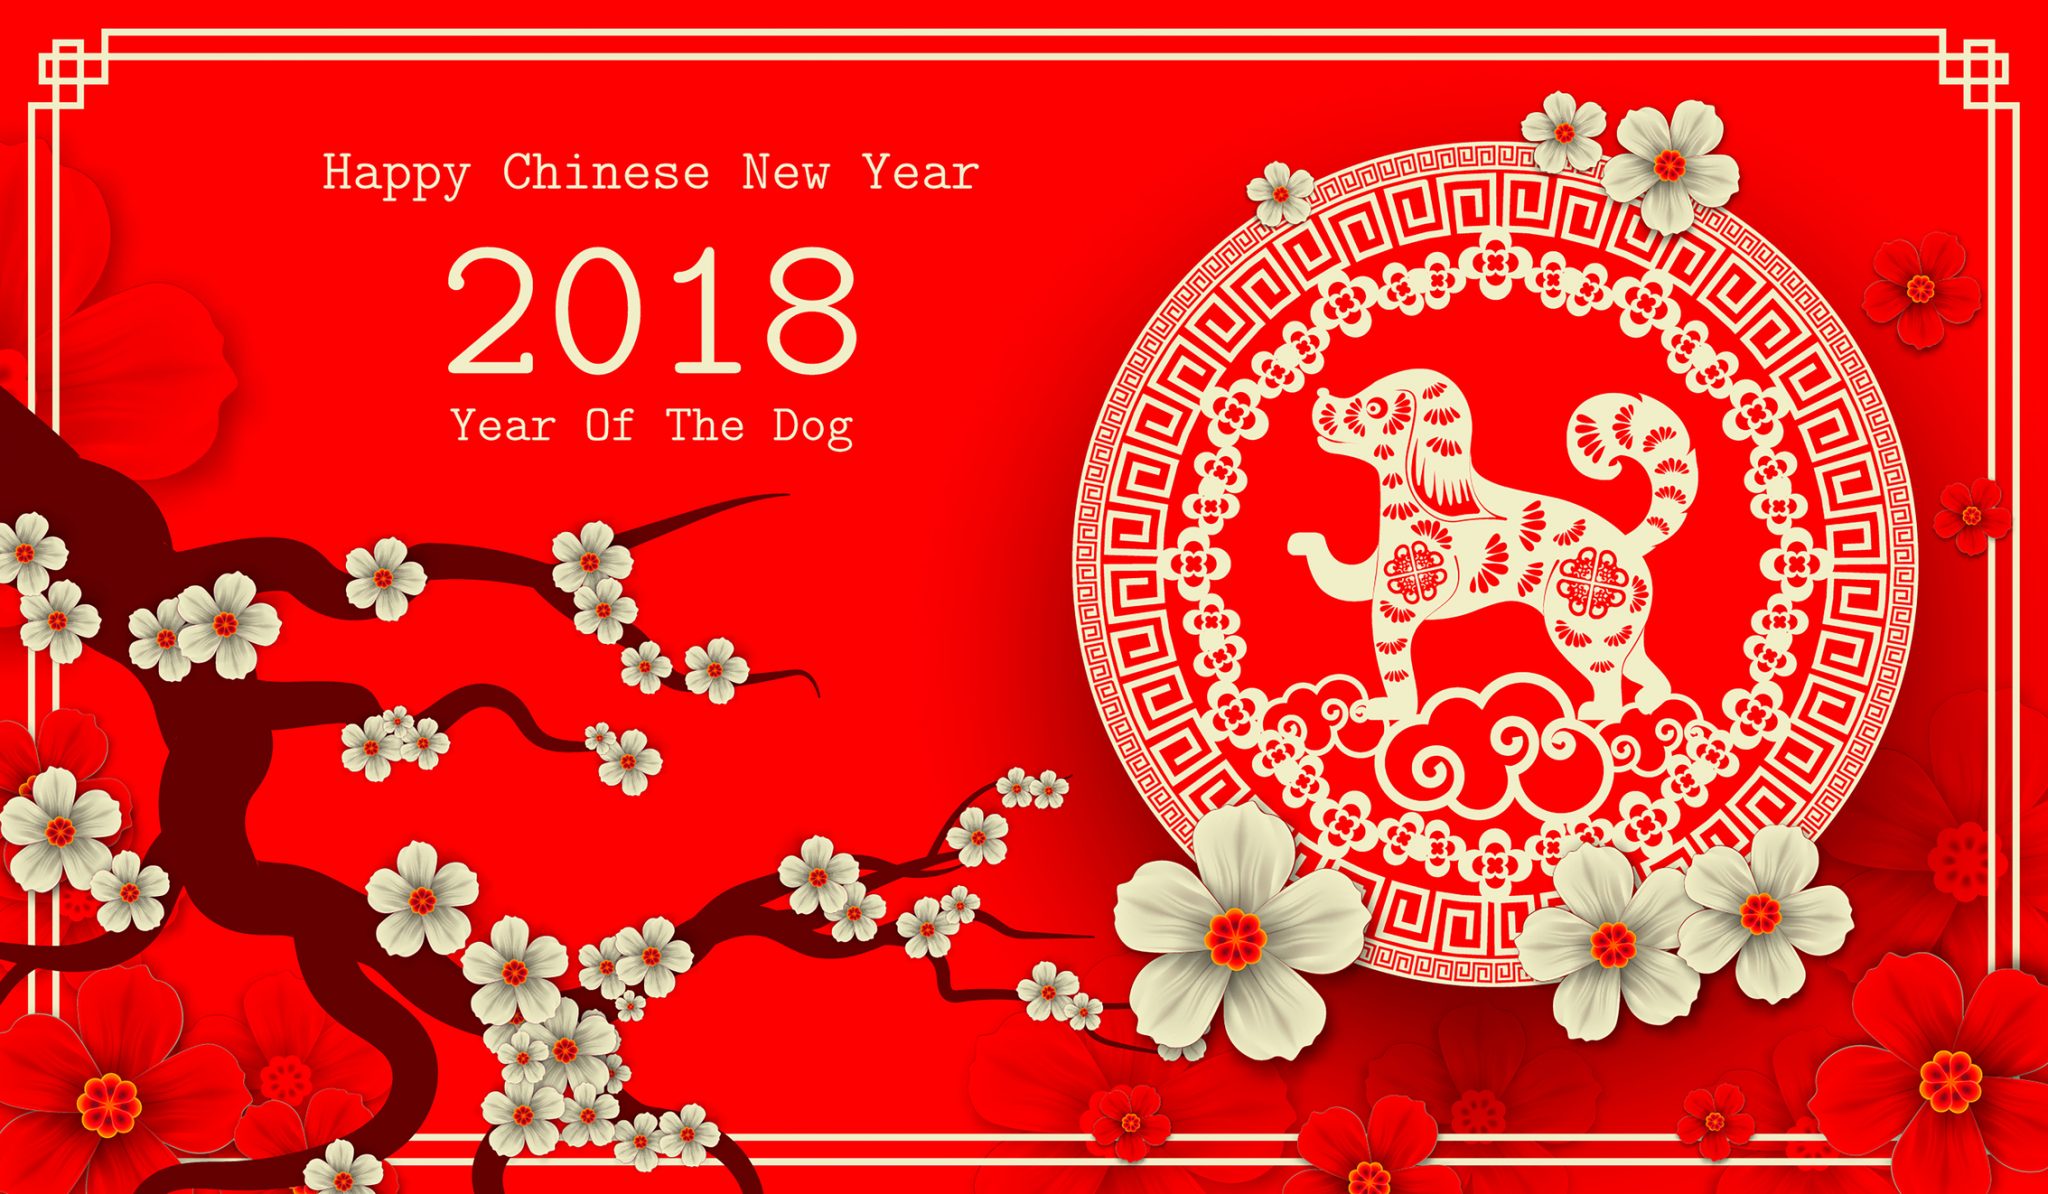 Chinese new year 2018 btc cryptocurrency wallet apidra